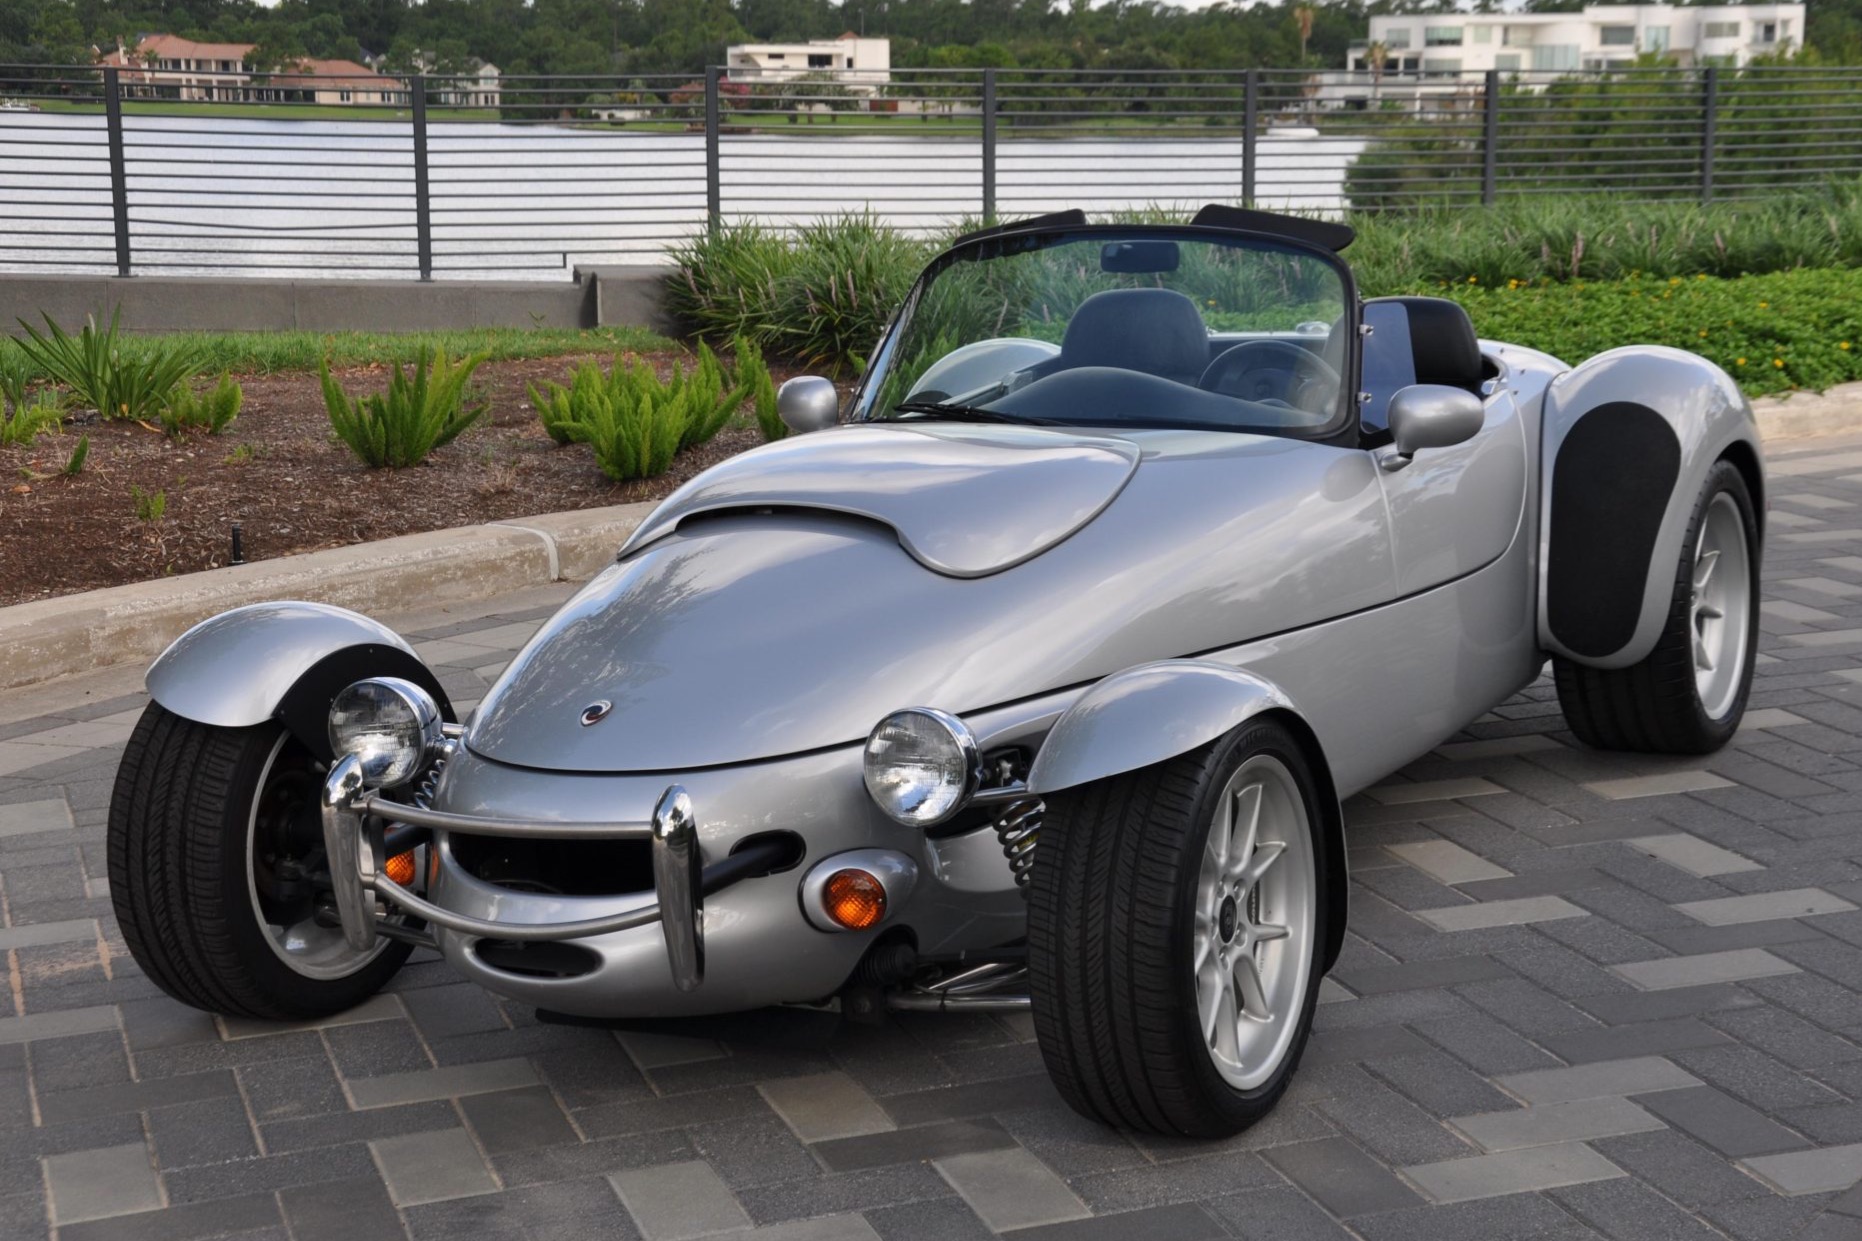 Used 1999 Panoz AIV Roadster Review